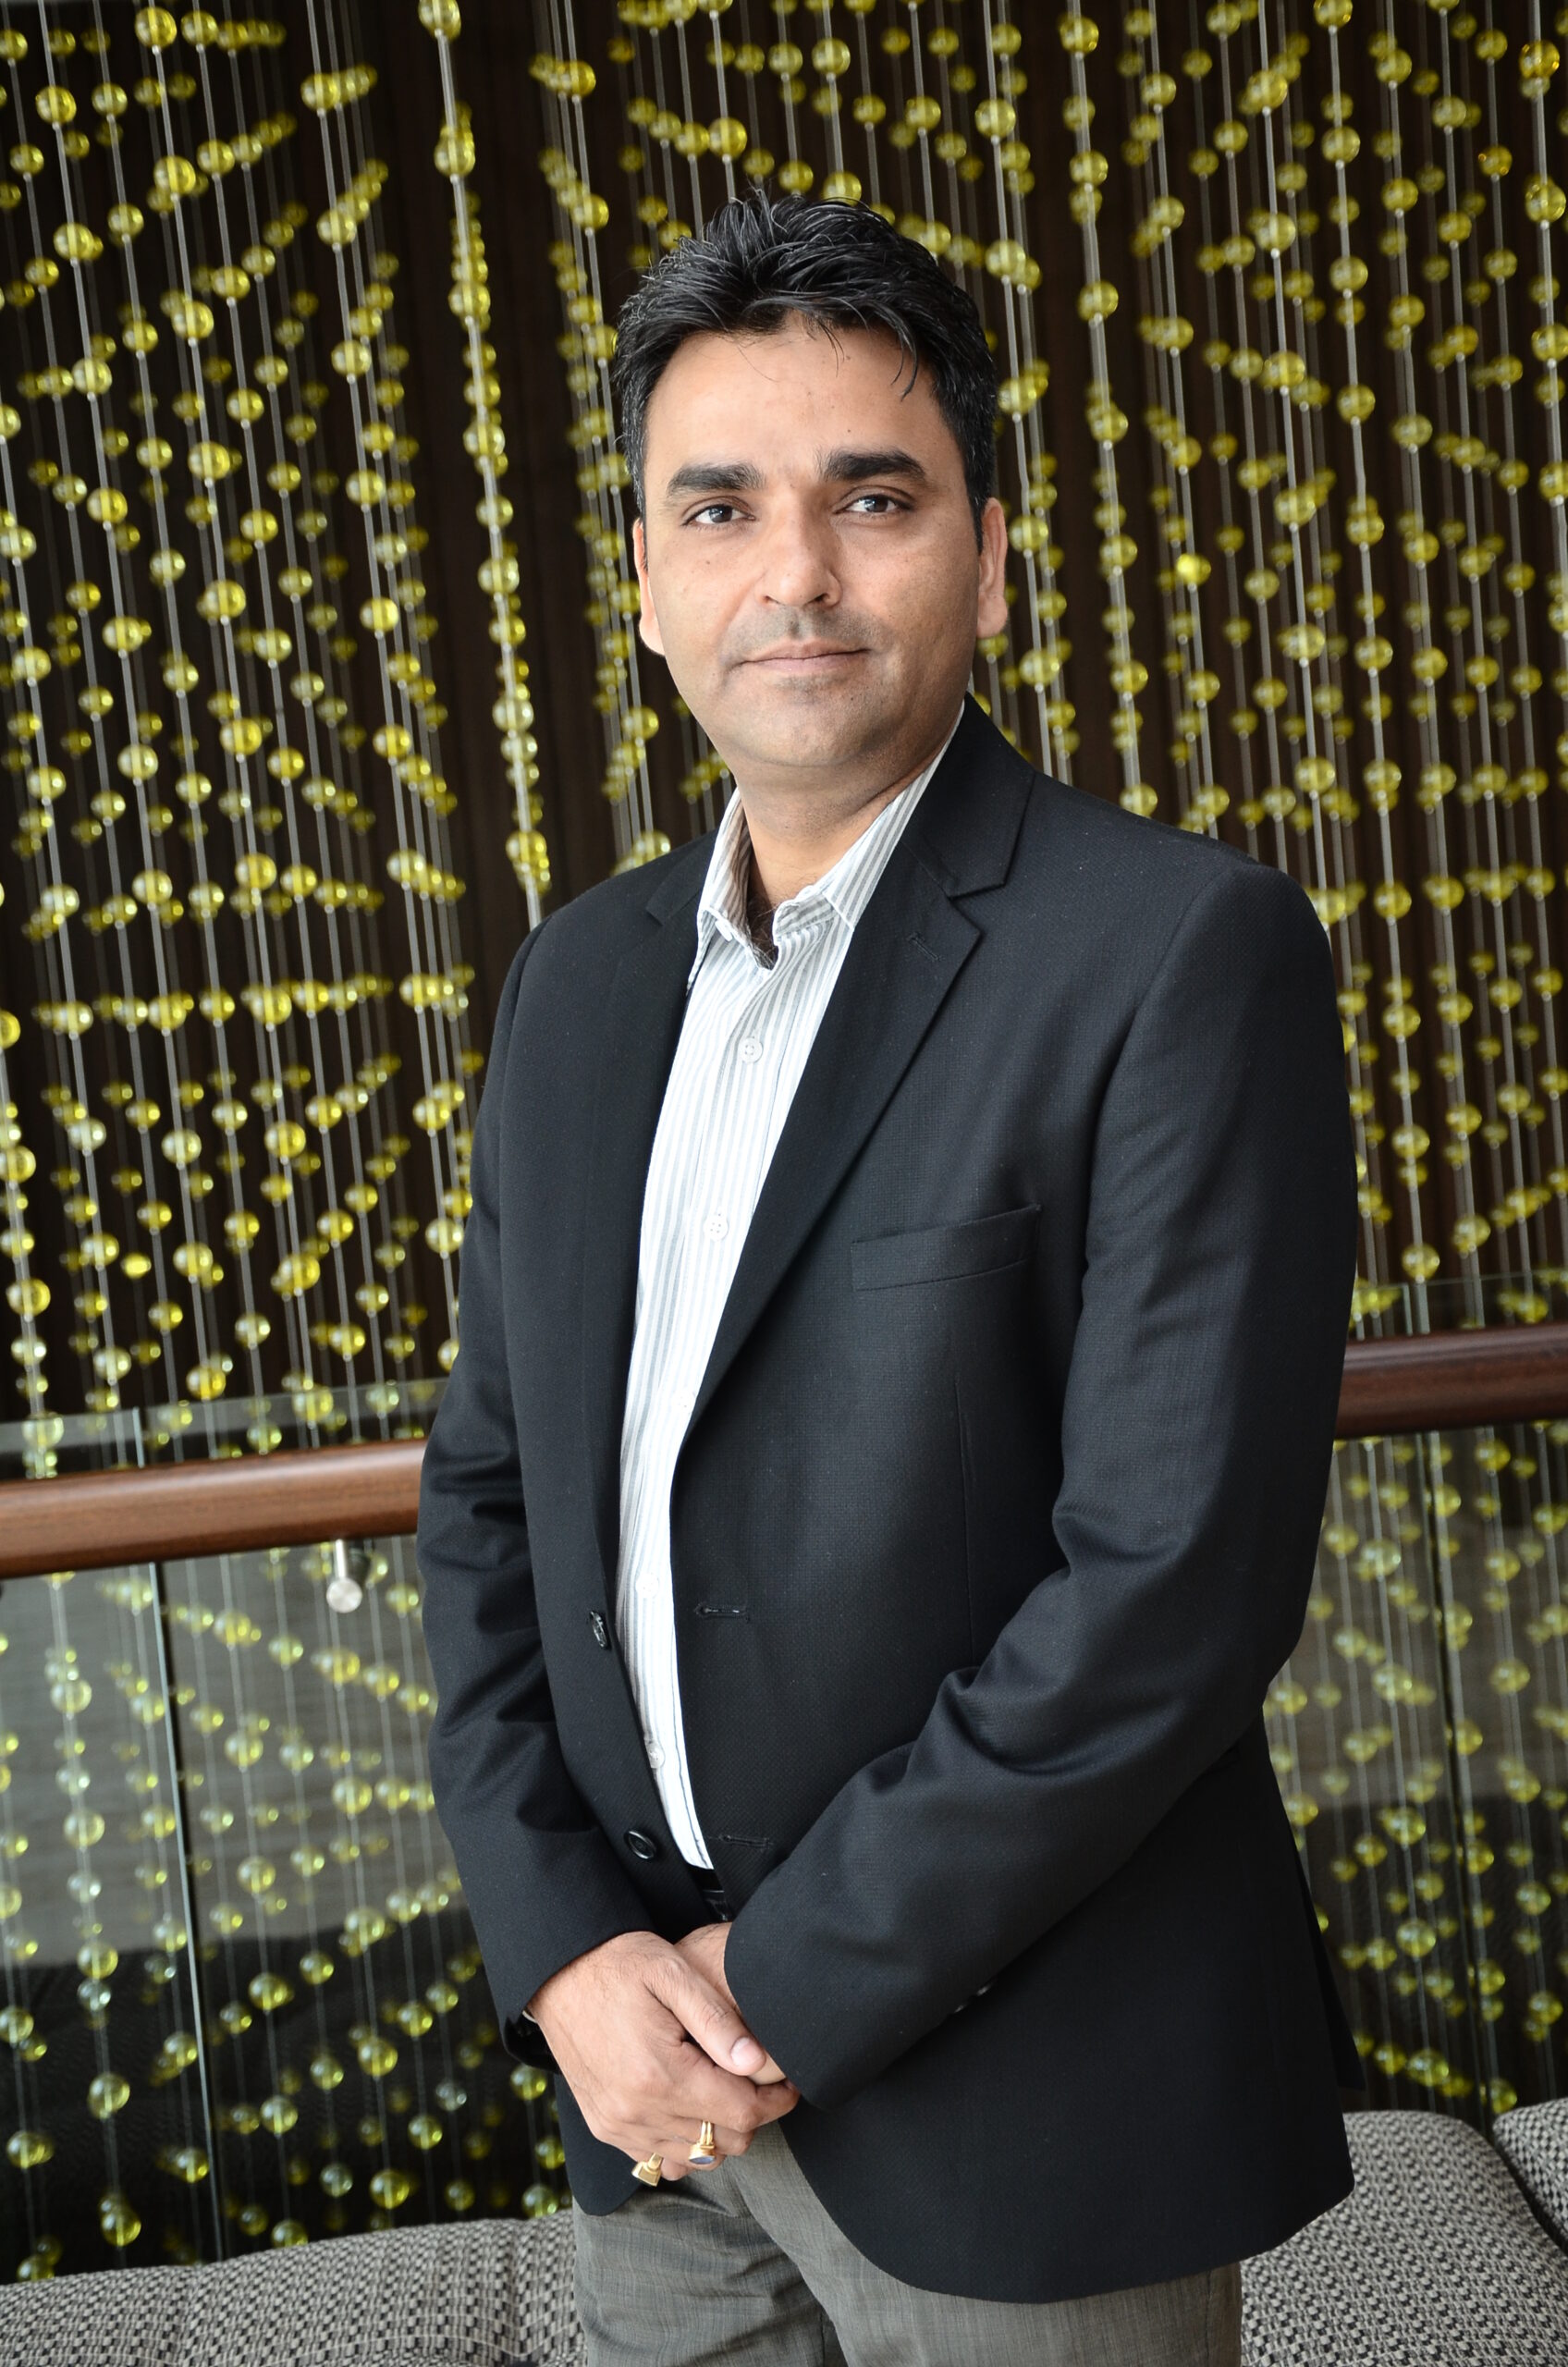 Accor appoints Aniruddh Kumar as VP Development for India and South Asia